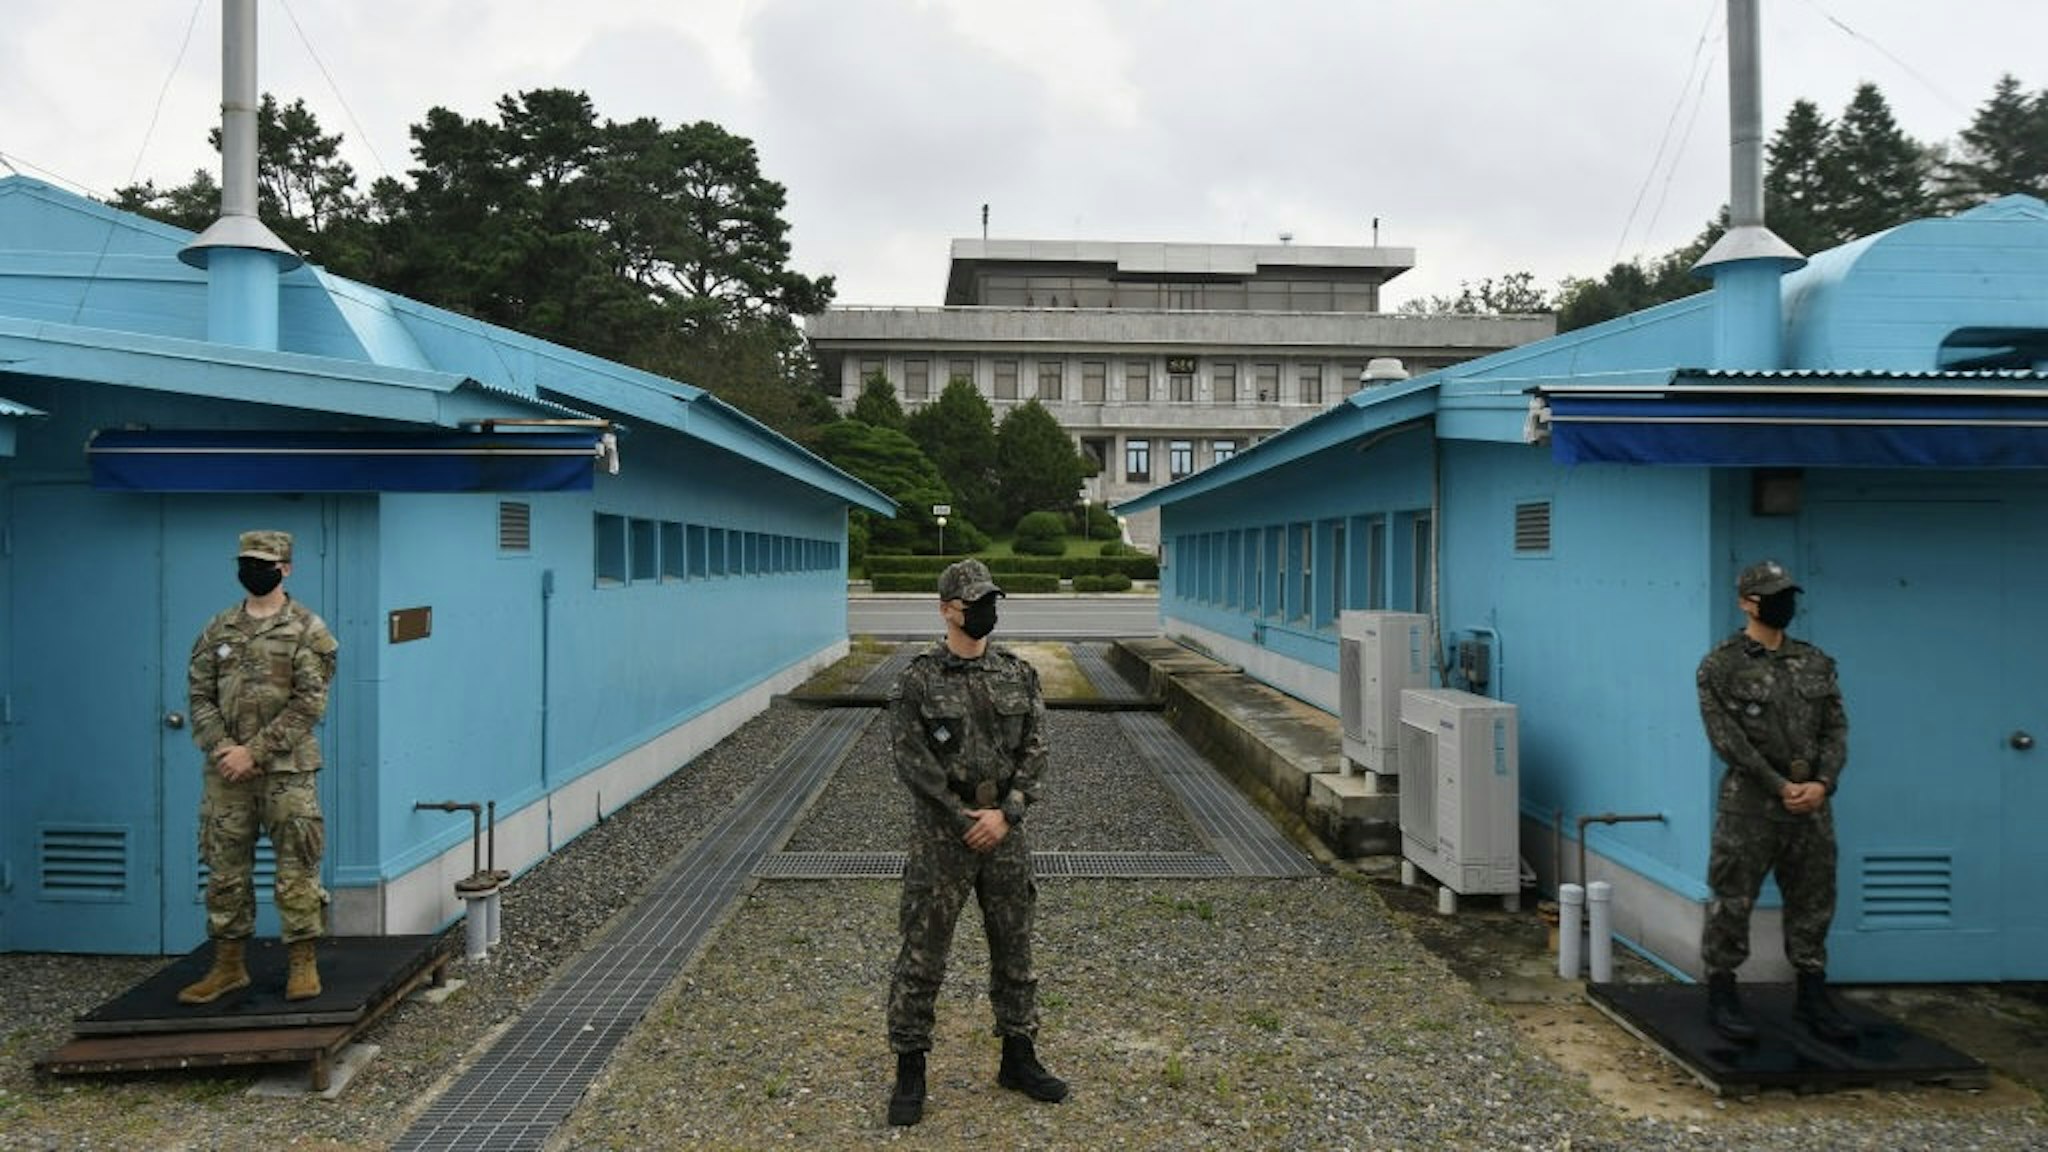 South Korean Unification Minister Visits North Korean Border Village PANMUNJOM, SOUTH KOREA - SEPTEMBER 16: U.S. and South Korean army soldiers stand guard during South Korean Unification Minister Lee In-young's visit to Panmunjom between South and North Korea in the demilitarized zone (DMZ) on September 16, 2020 in Panmunjom, South Korea. Unification Minister Lee In-young visit the truce village of Panmunjom for the first time since taking office, raising expectations he could send a message to North Korea amid stalled cross-border exchanges and cooperation. (Photo by Park Tae-hyun-Korea - Pool/Getty Images) Pool / Pool